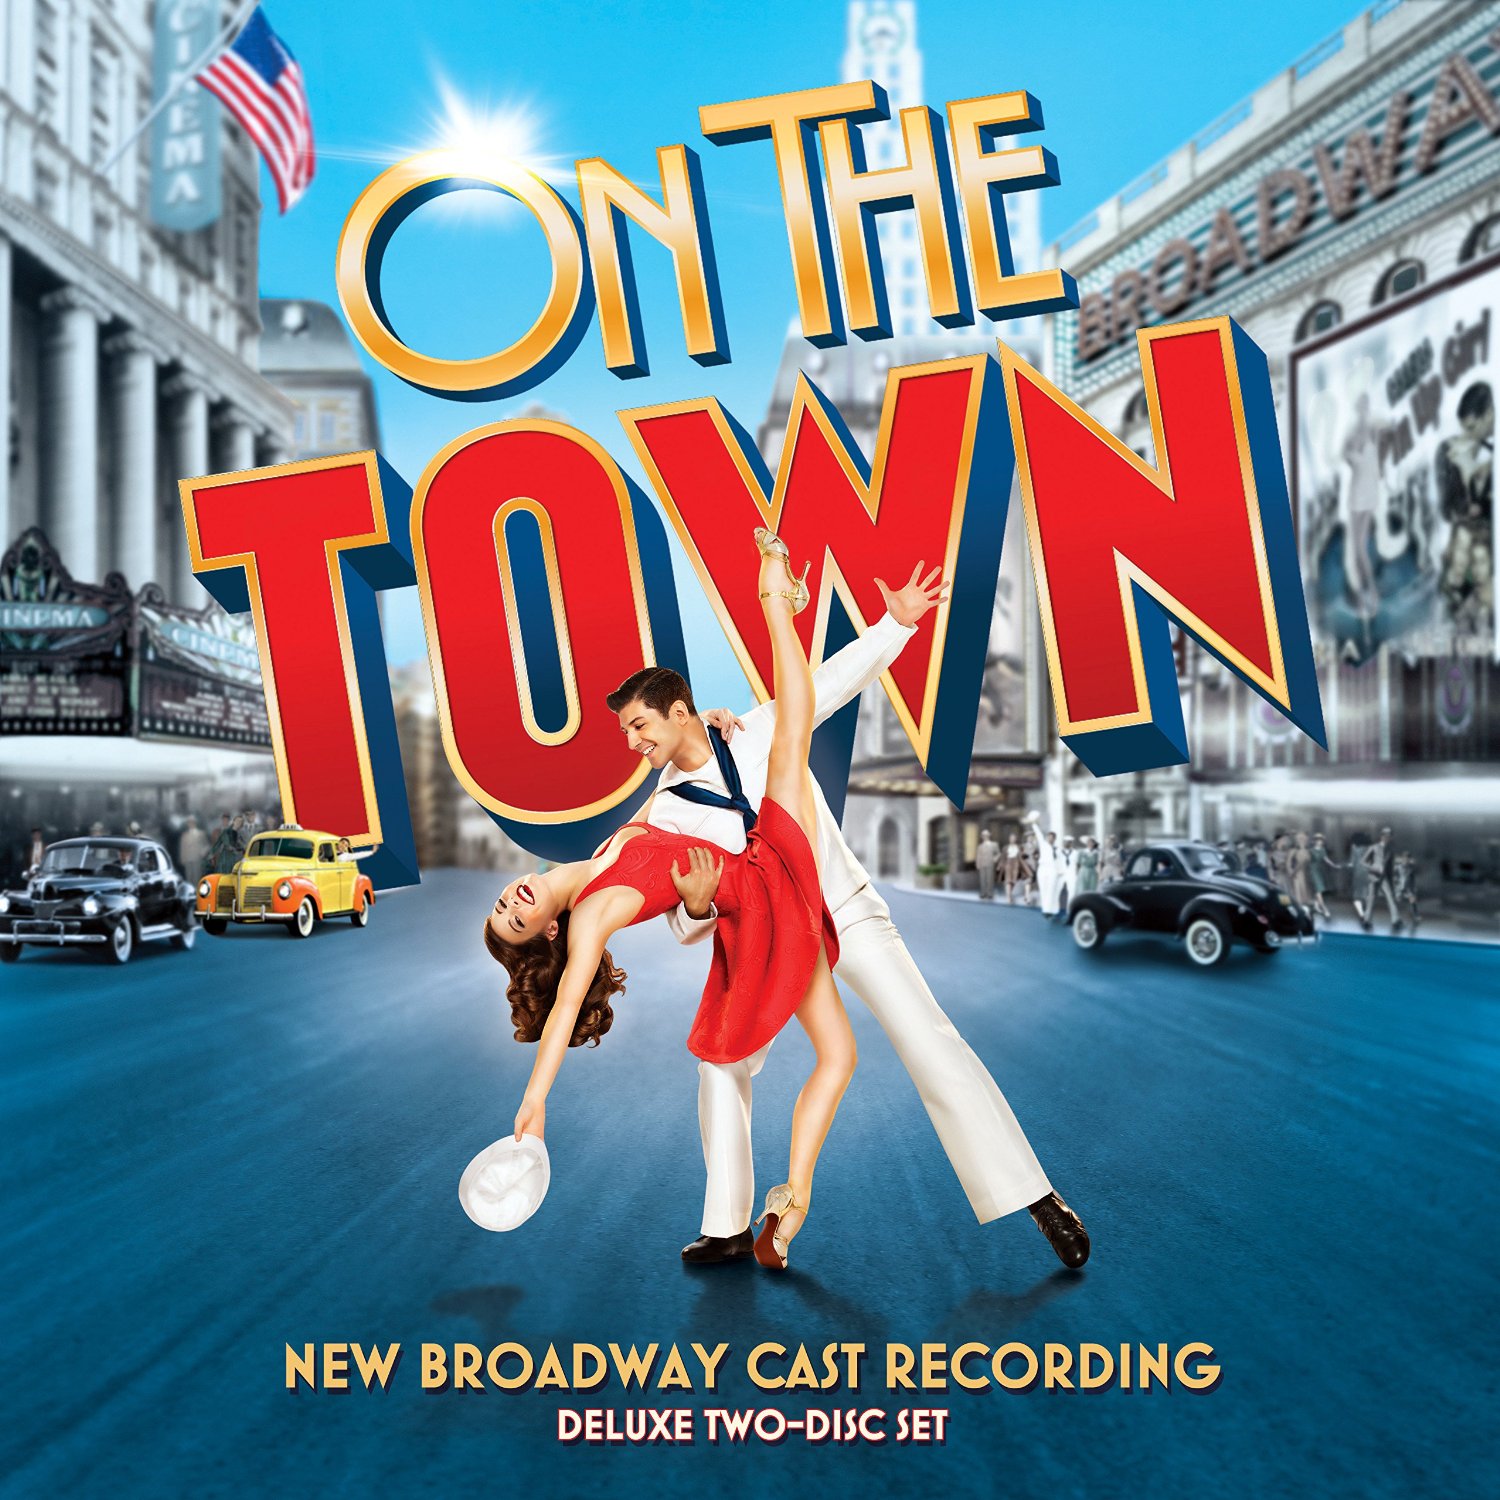 On The Town - New Broadway Cast Recording Album